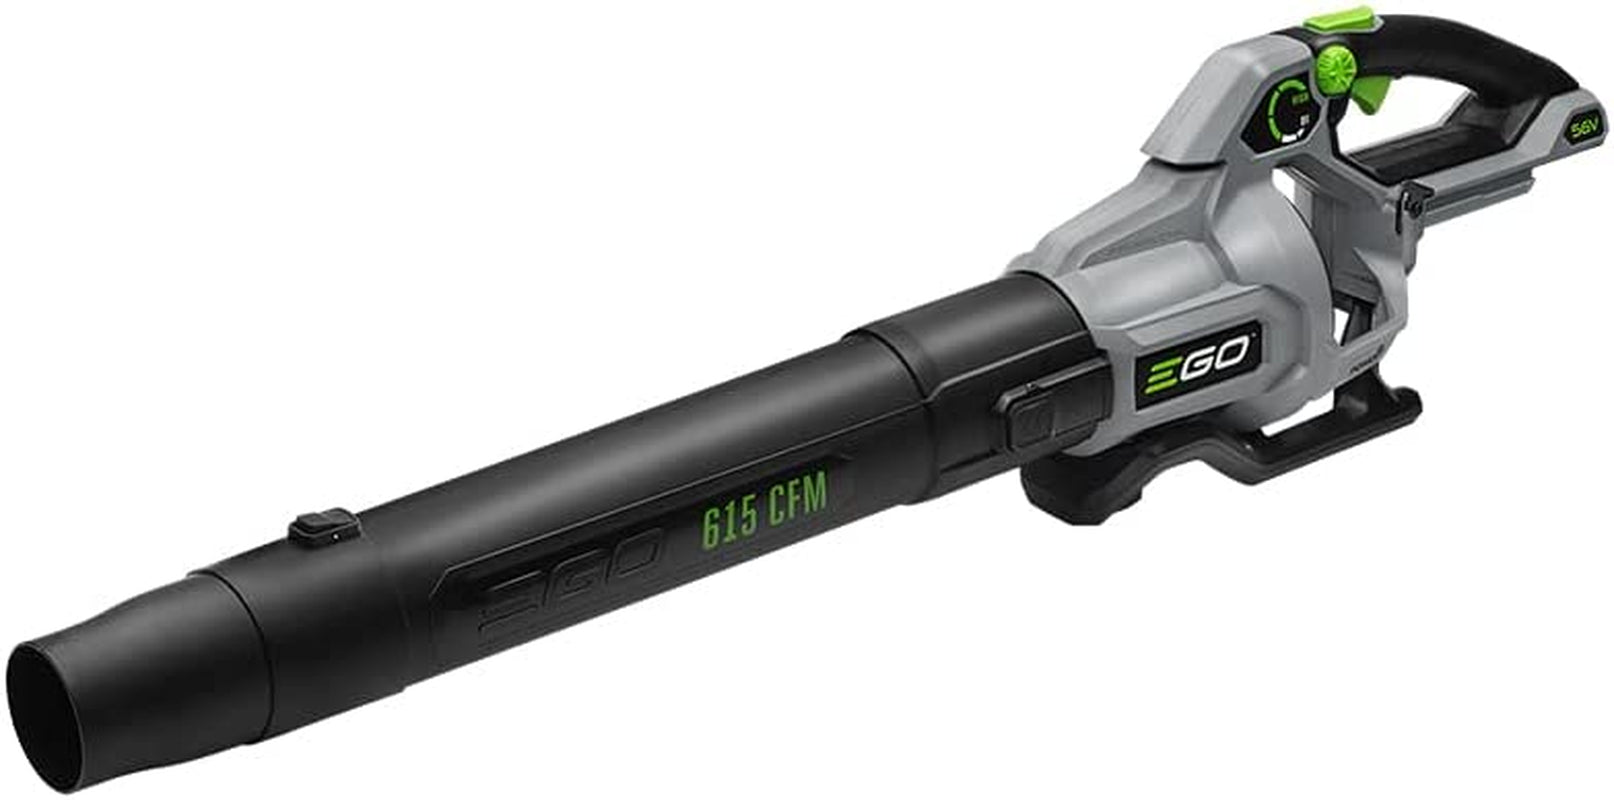 EGO Power+, EGO Power+ LB6150 615 CFM Variable-Speed 56-Volt Lithium-Ion Cordless Leaf Blower - Battery and Charger Not Included, Black